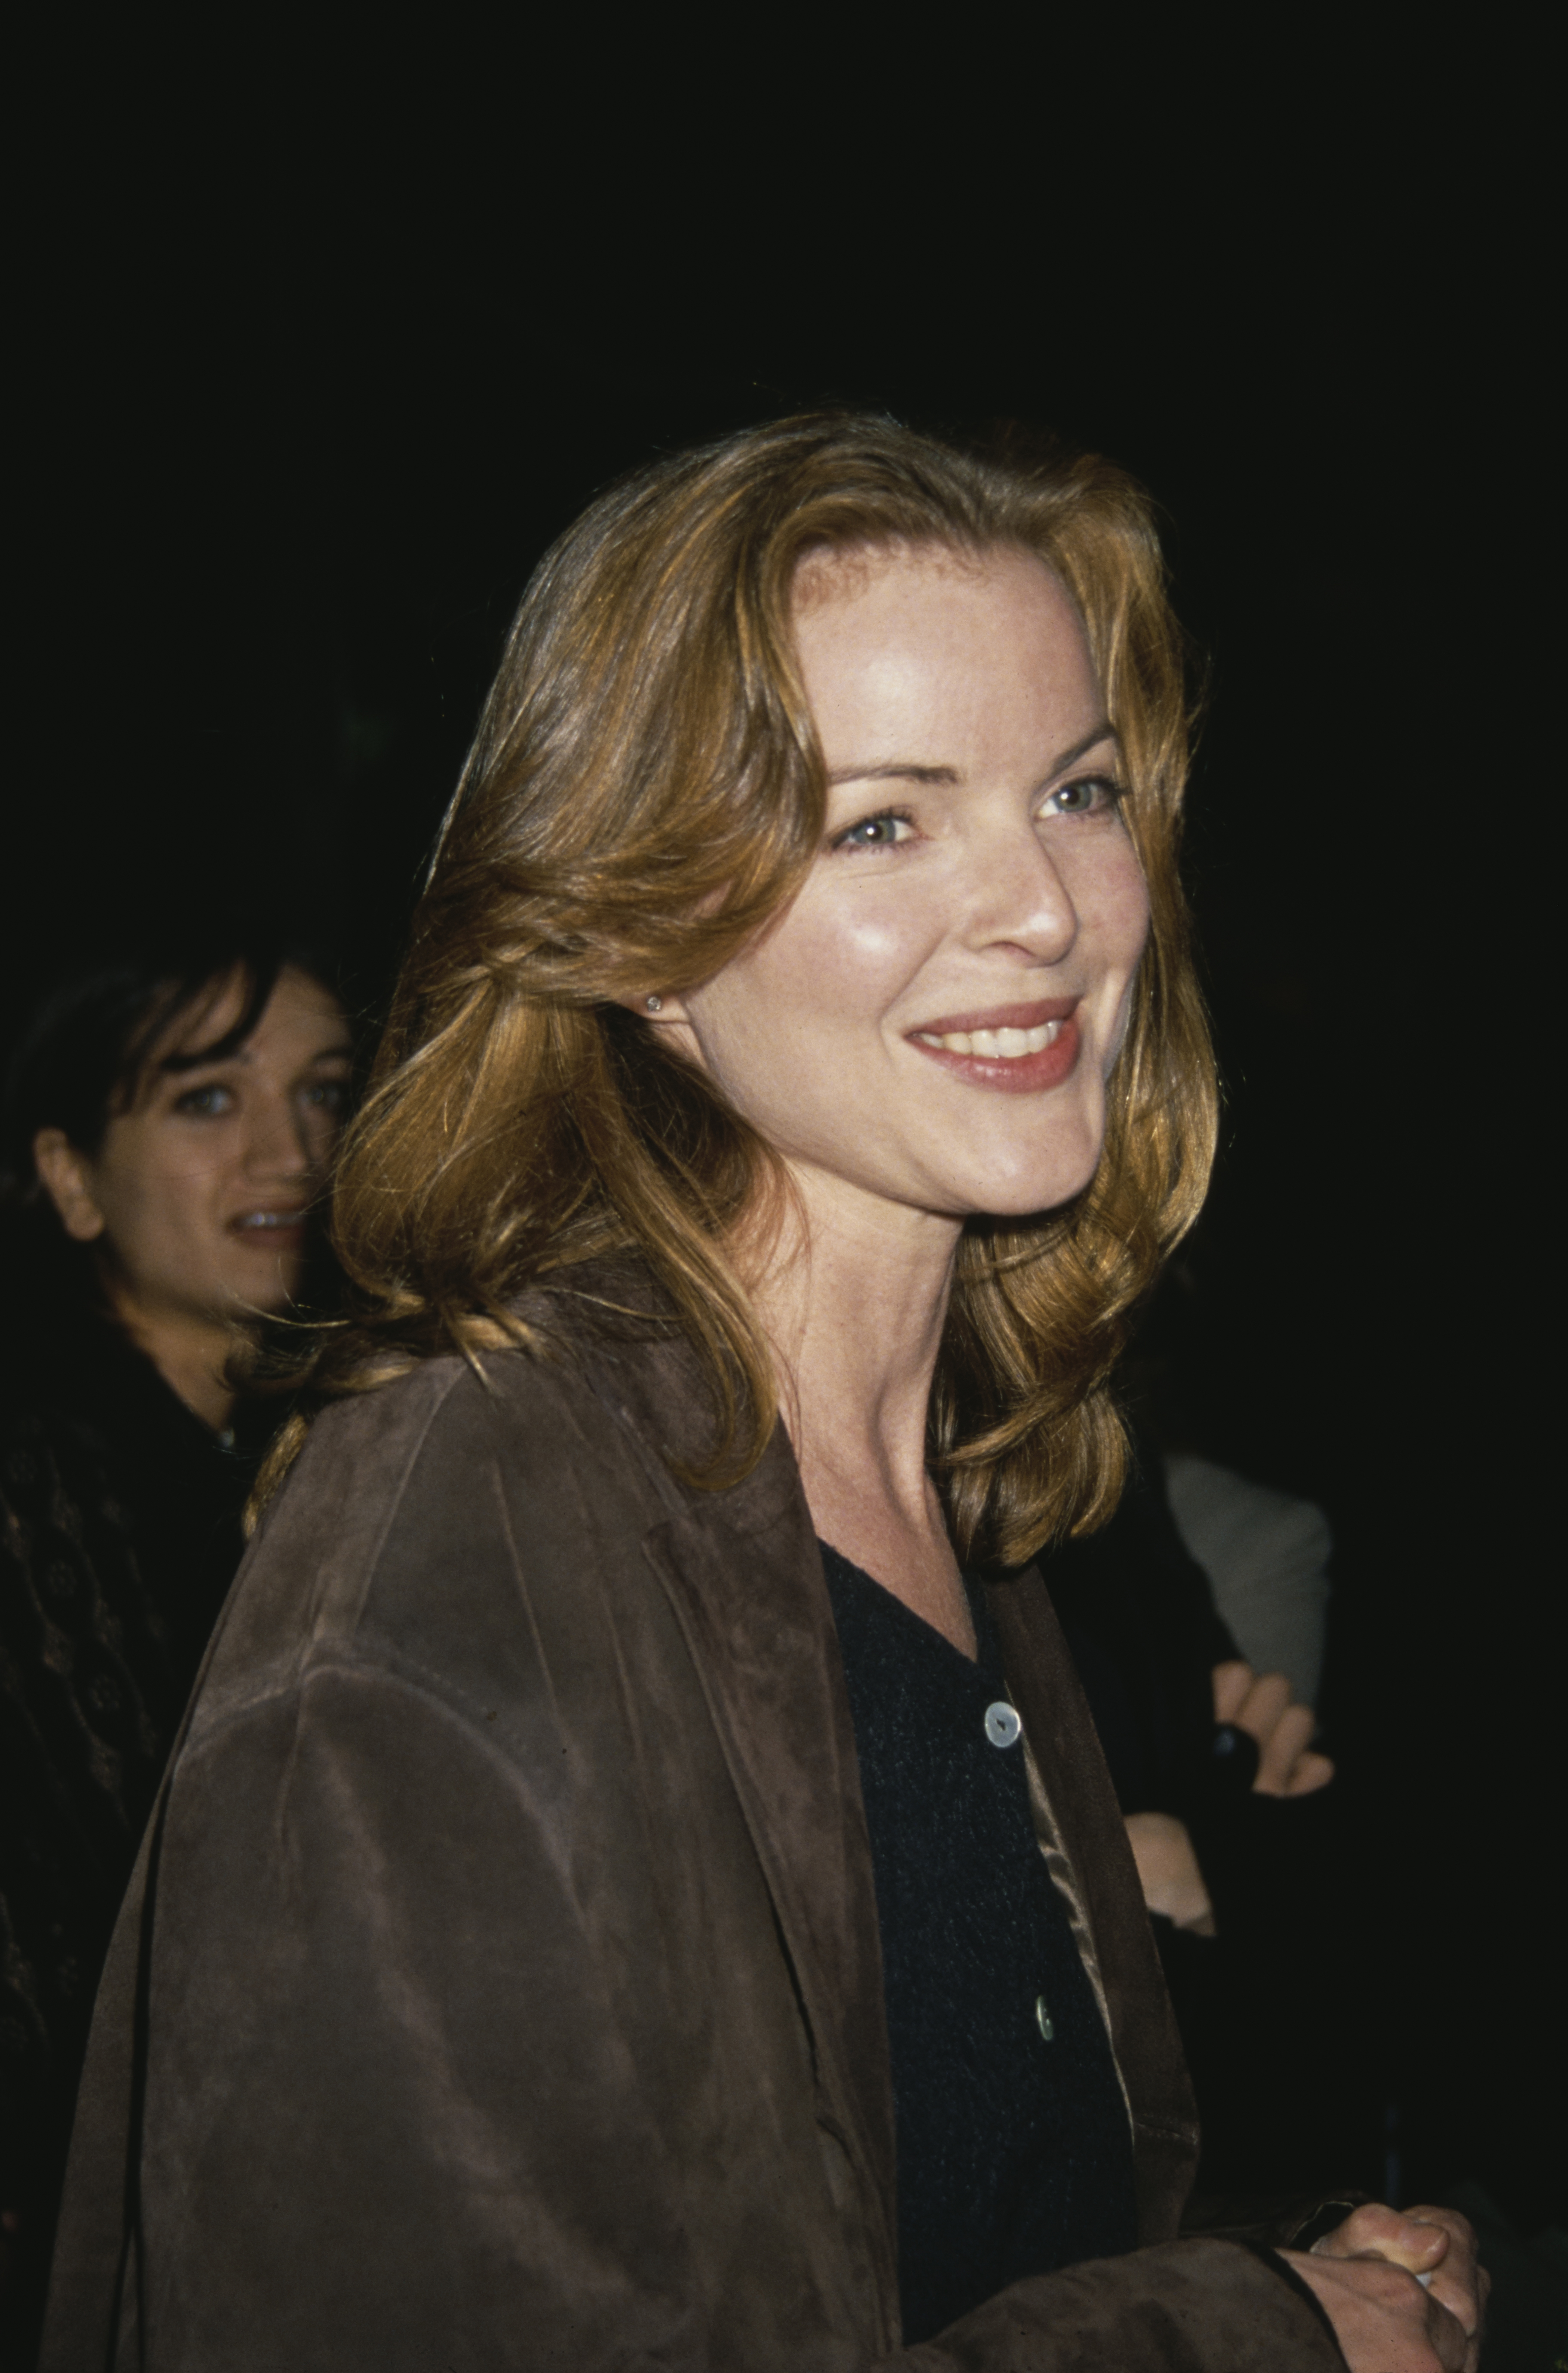 Marcia Cross attends a red carpet event in 1994 | Source: Getty Images